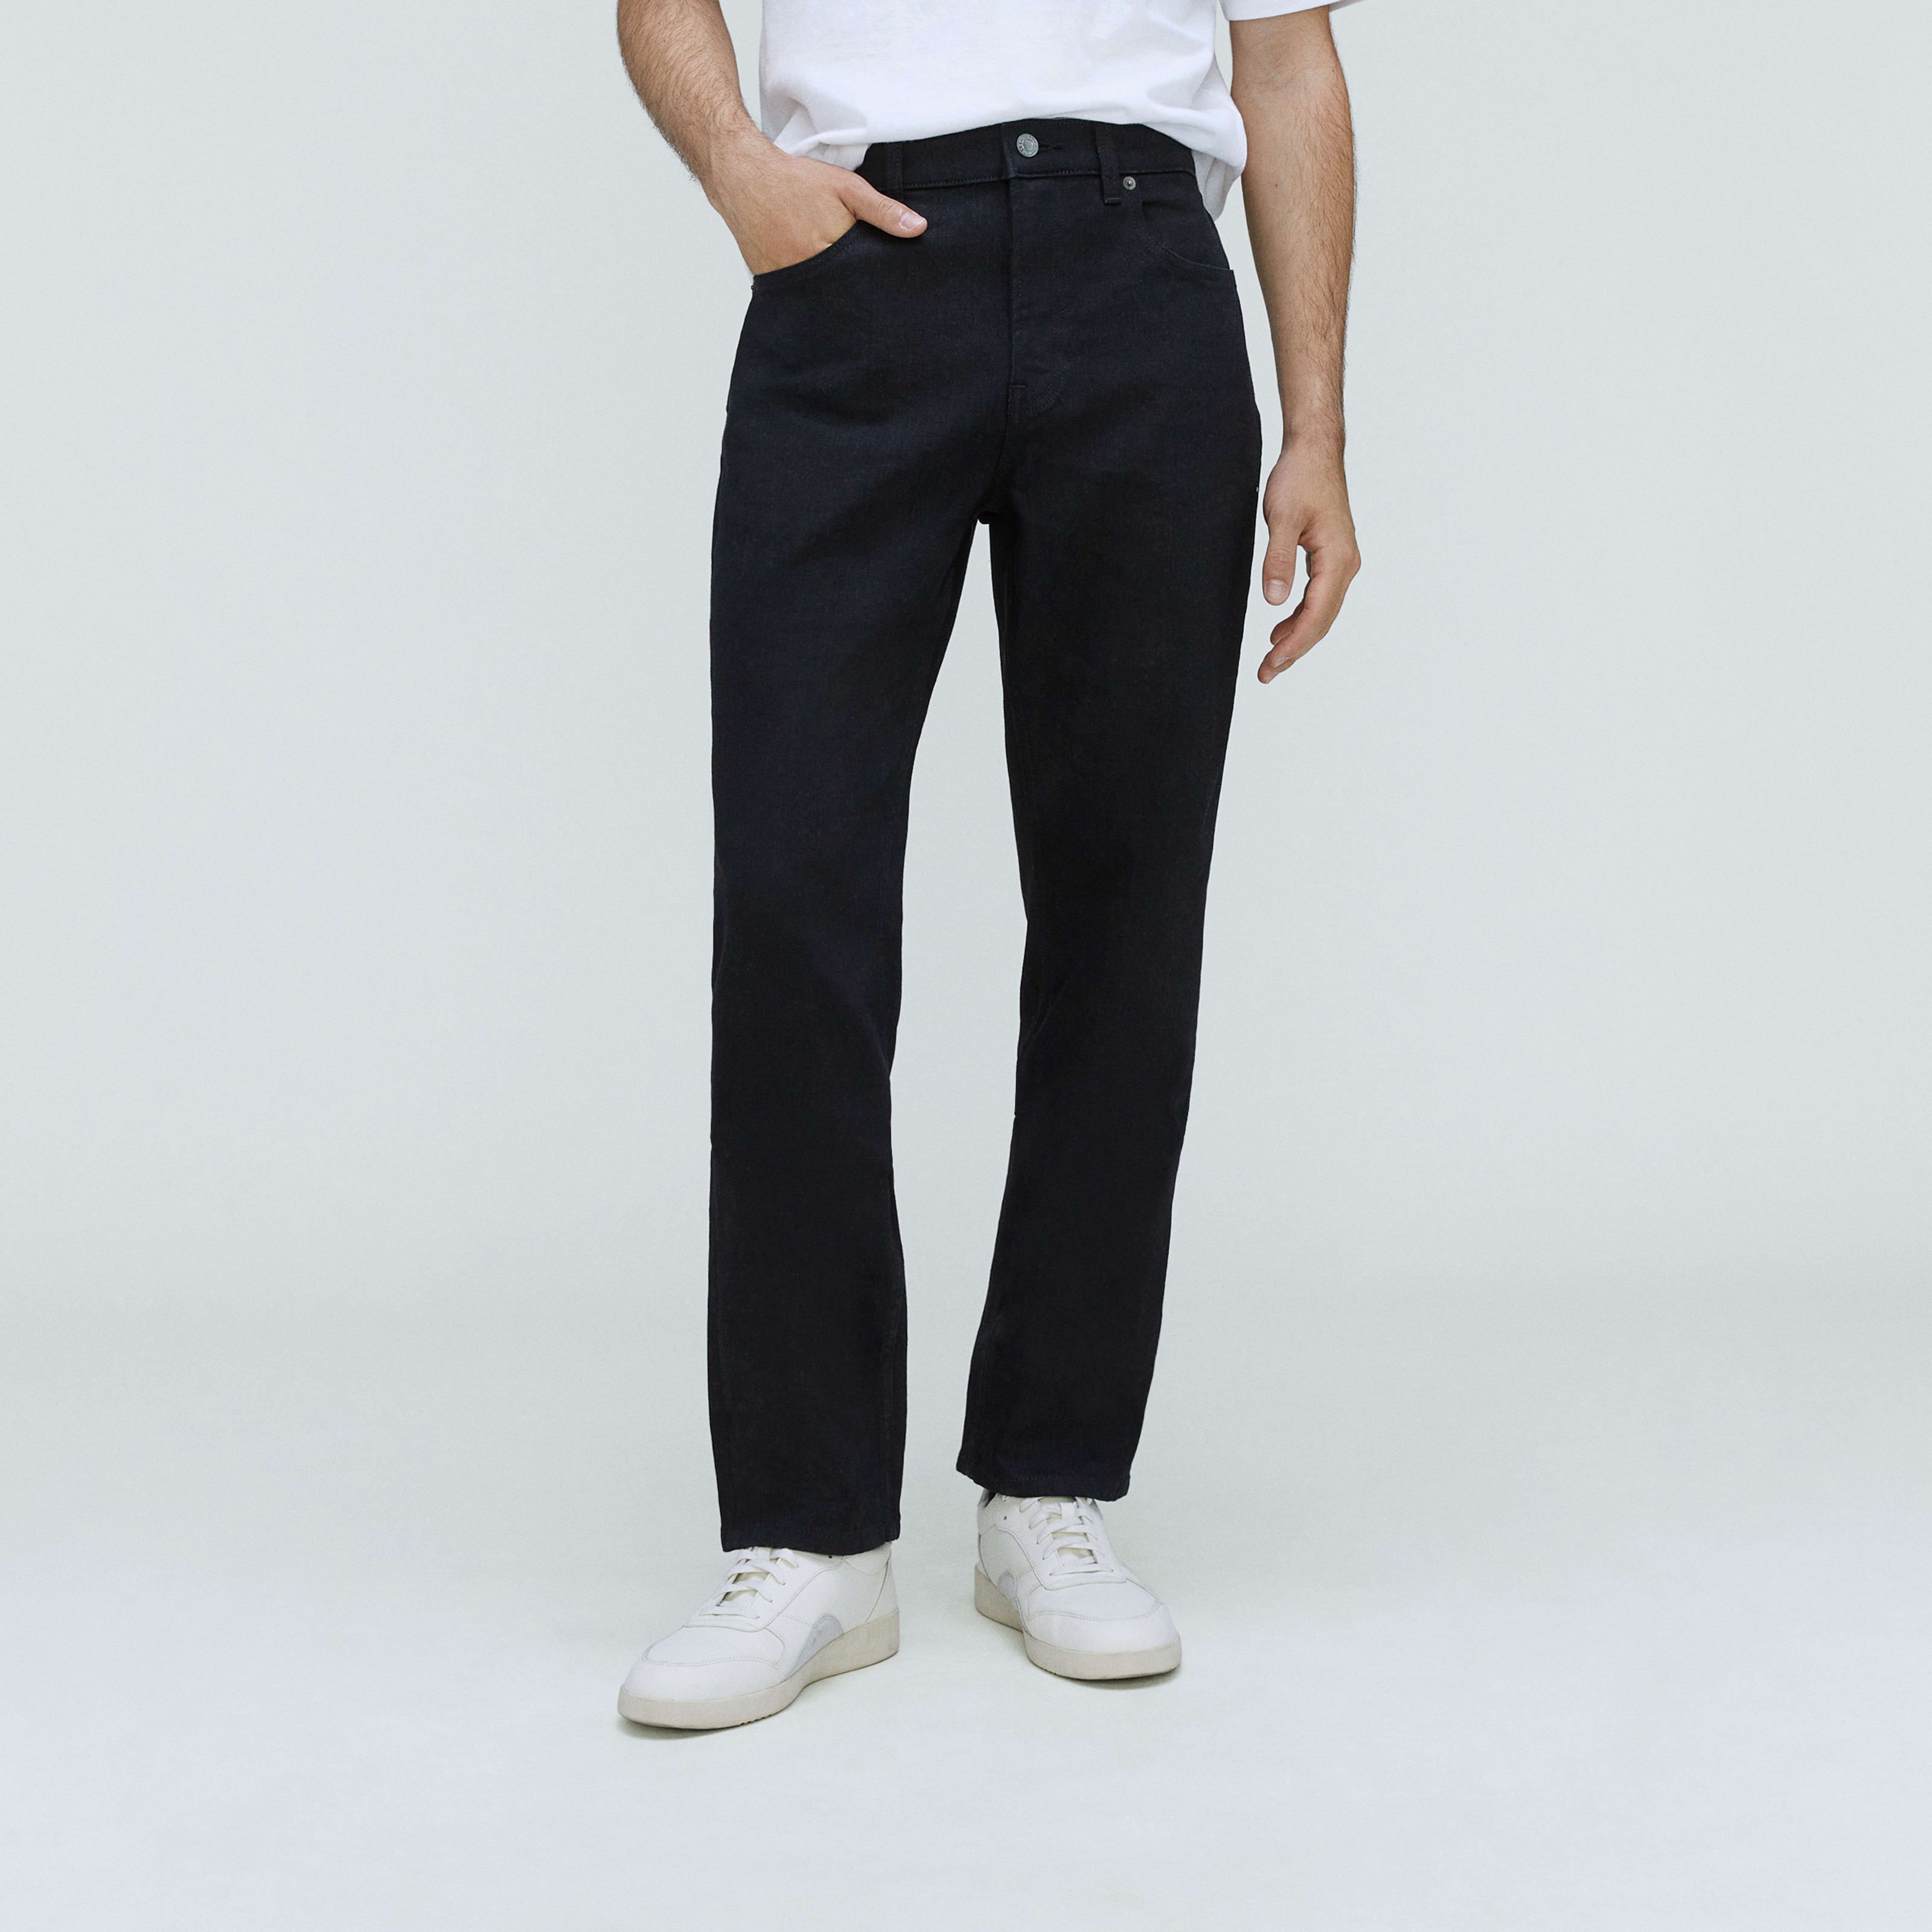 Men's Classic Straight Jean by Everlane in Black, Size 38x30 | Everlane